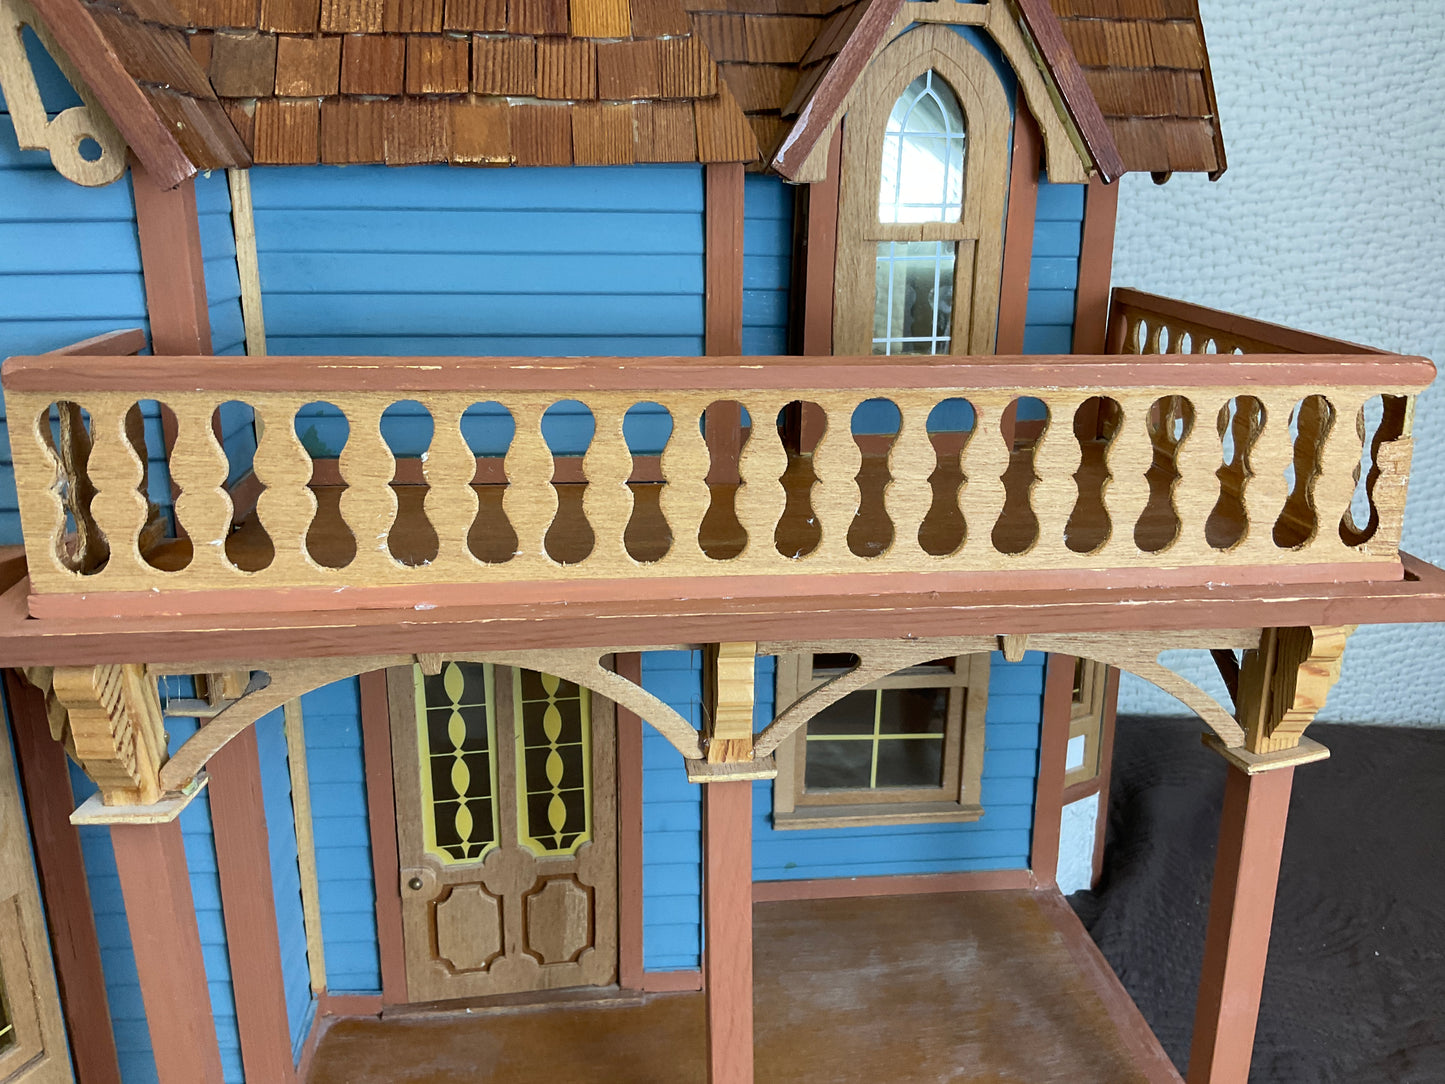 Handmade Wooden Dollhouse With Furniture